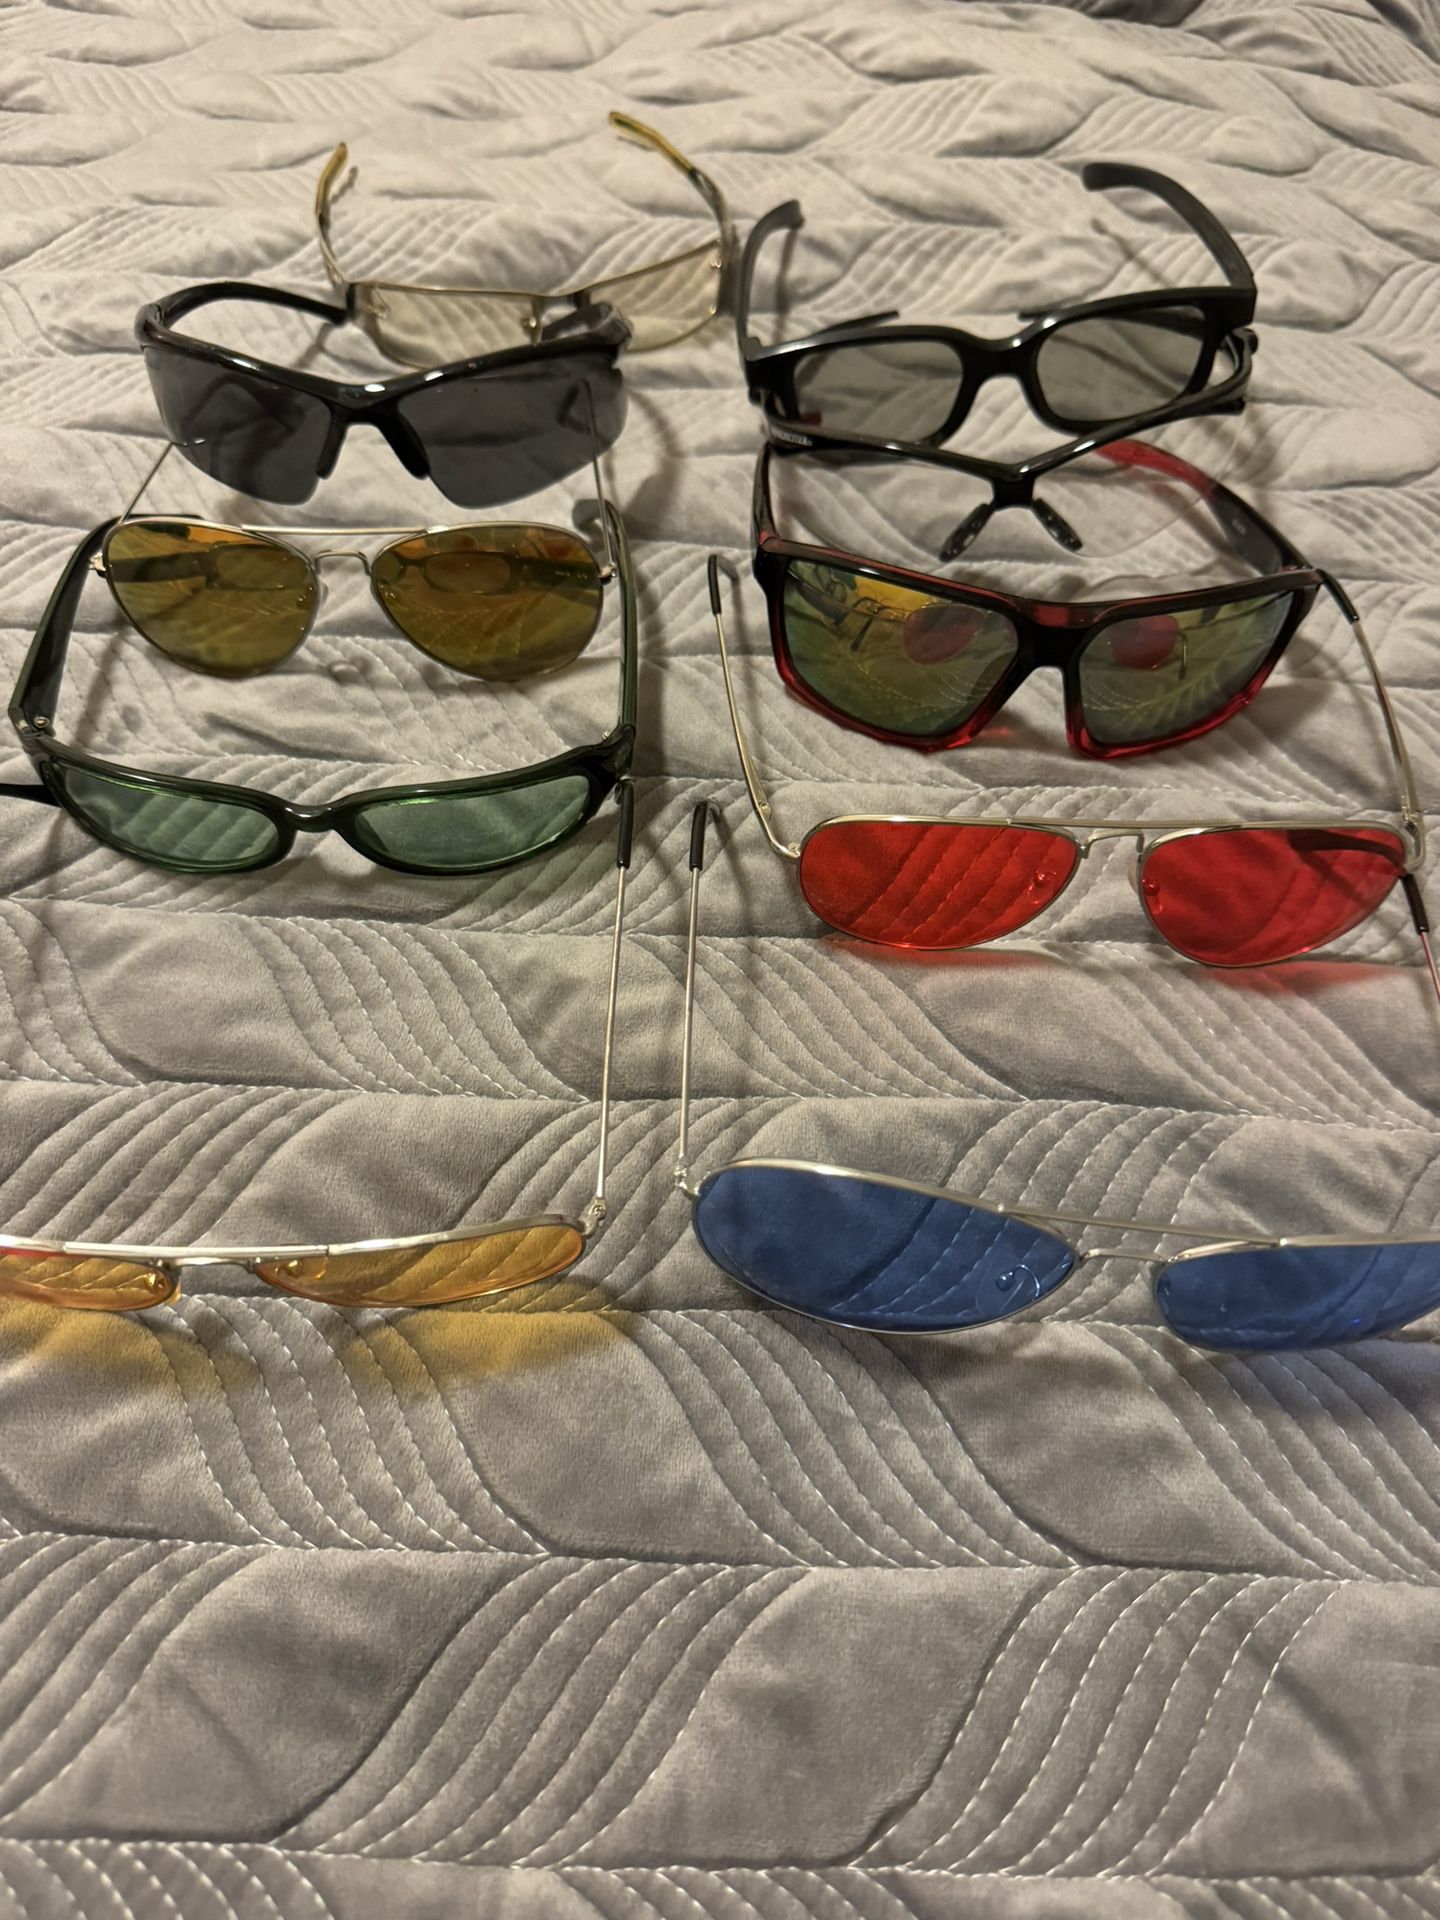 Sunglass collection